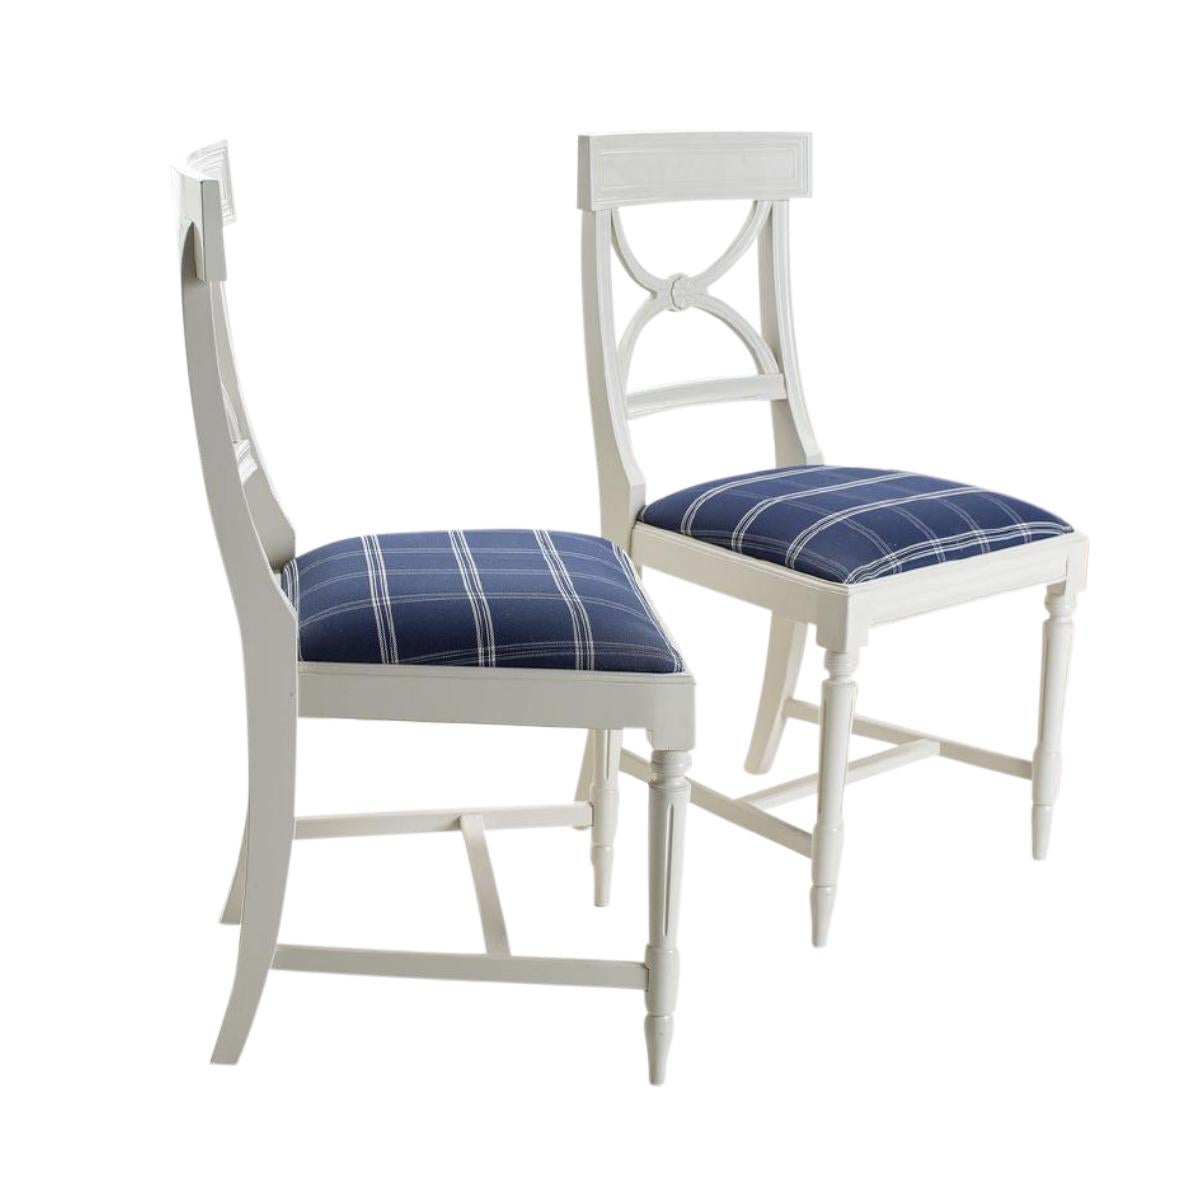 2 classic Swedish Gustavian Bellman chairs painted white with a classic check blue fabric. Chair measurements:
Width: 47cm / 19